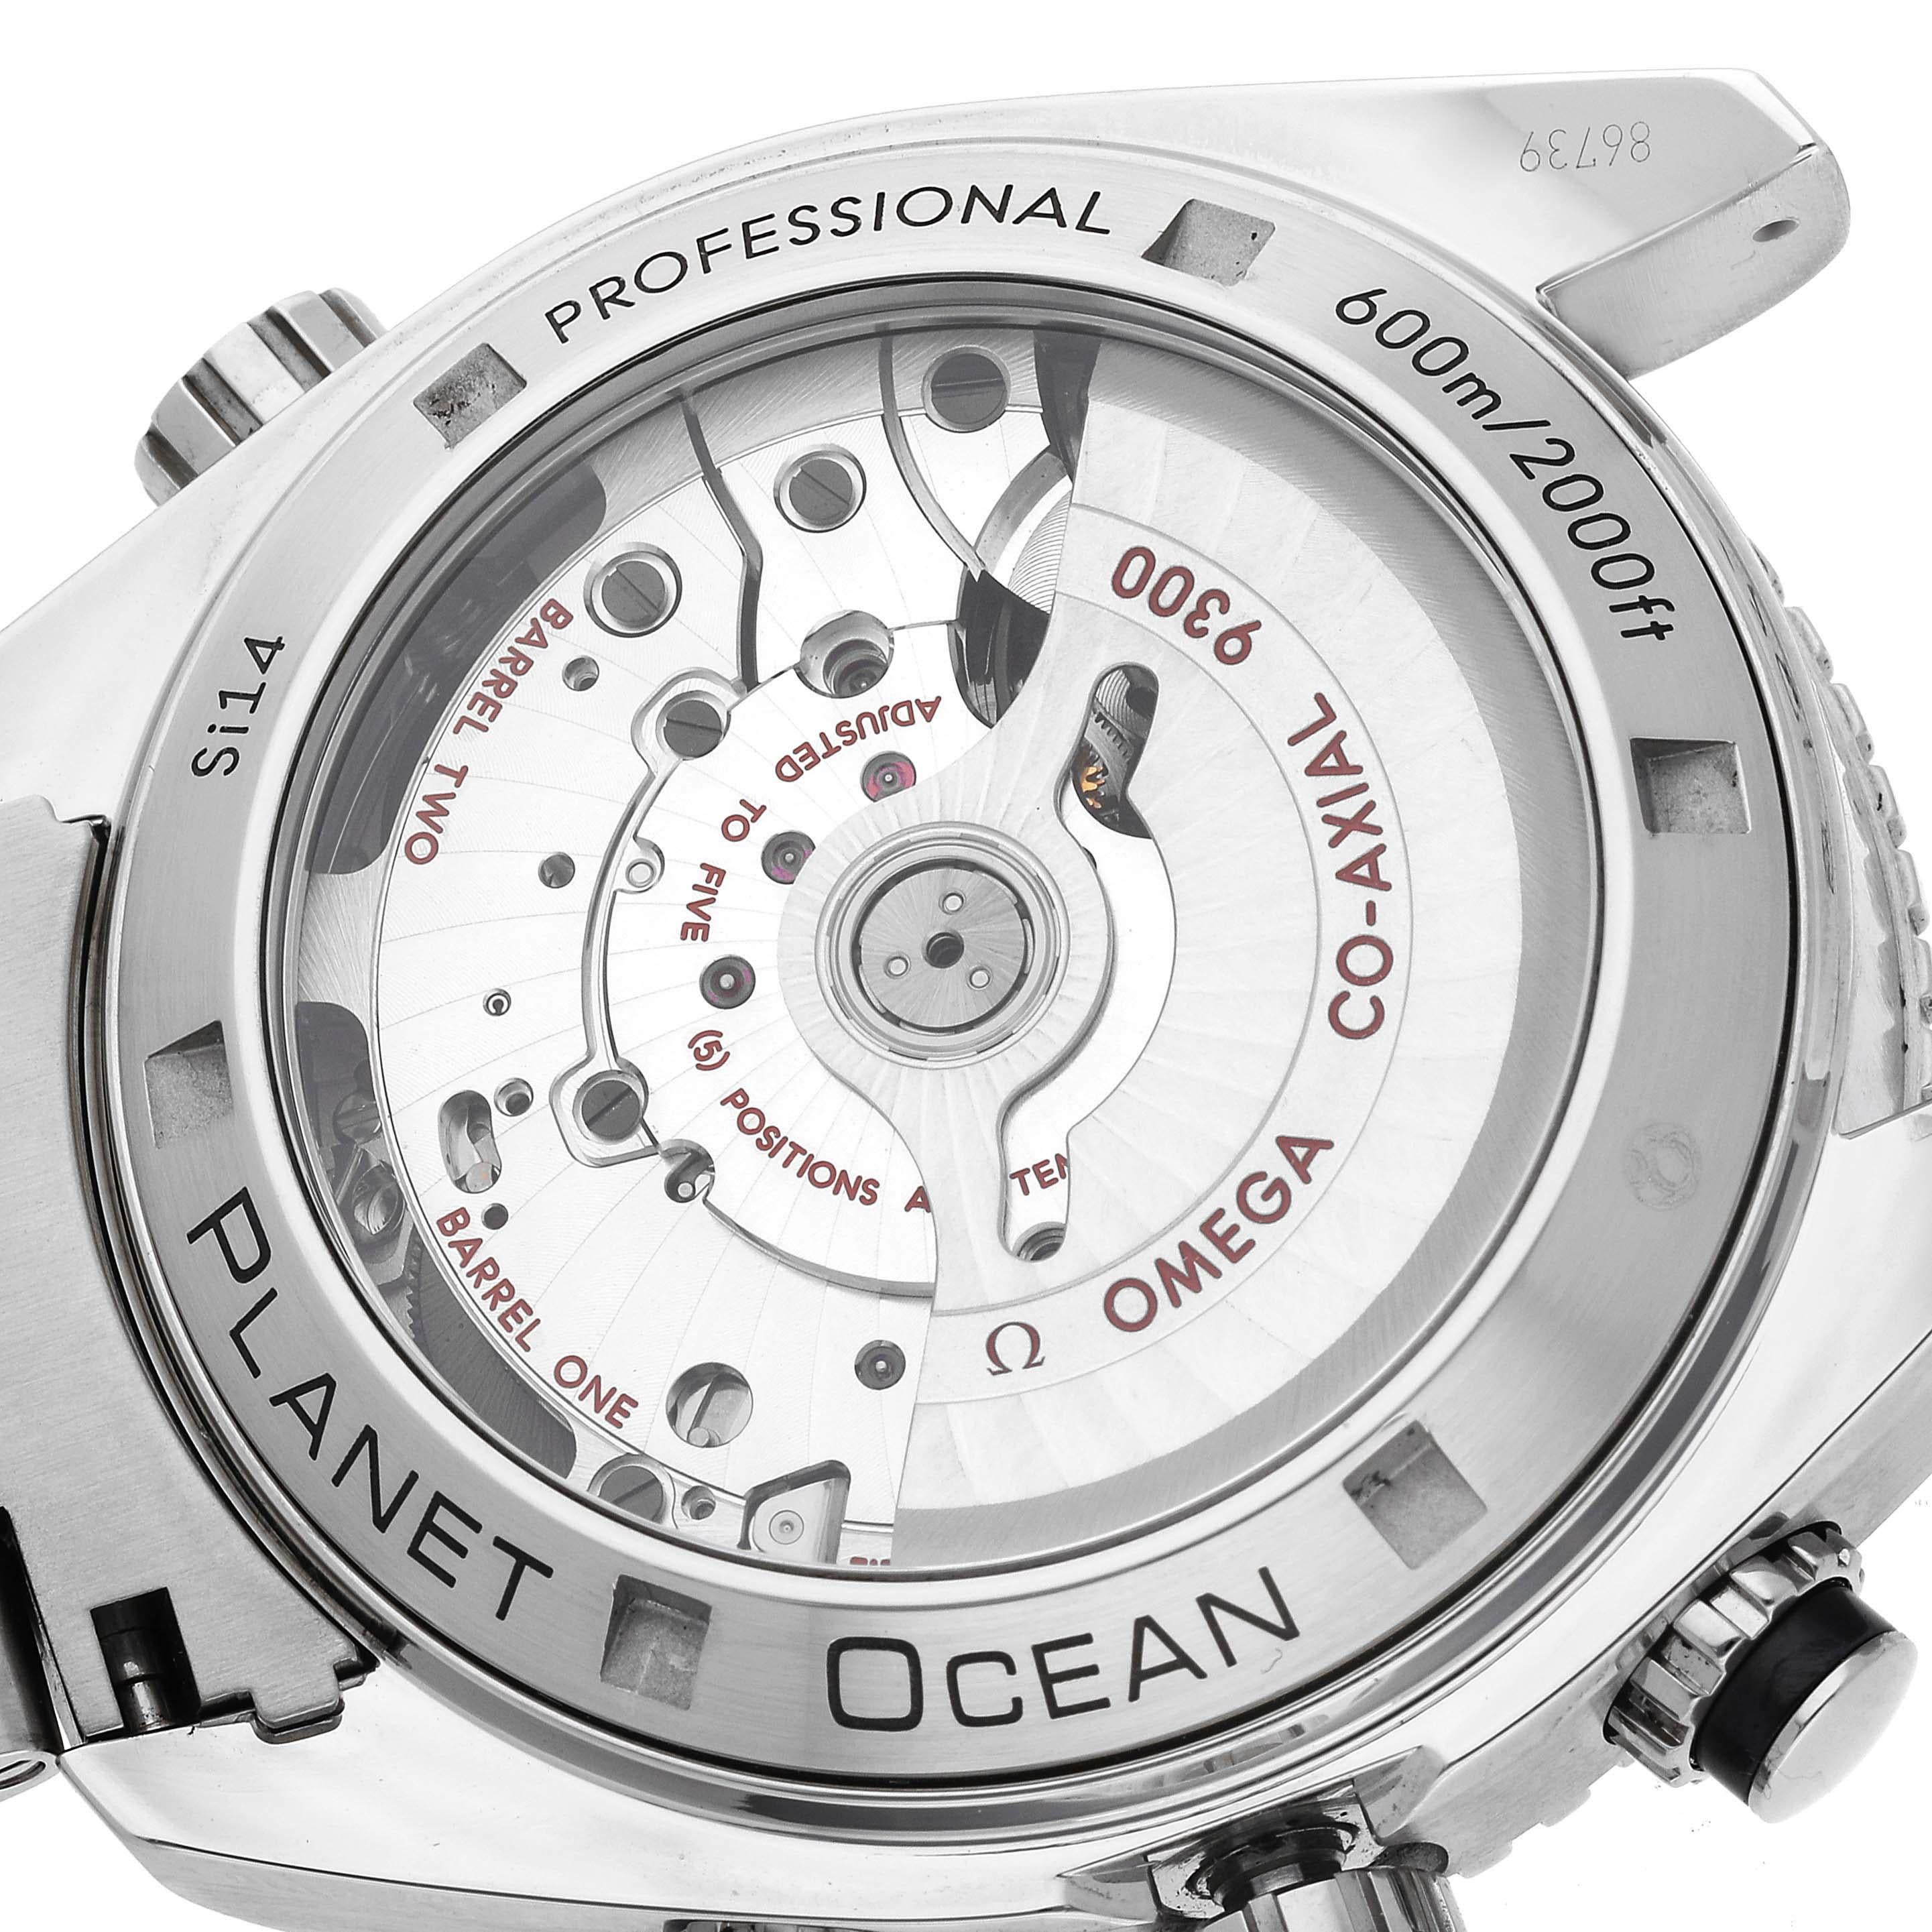 Omega Seamaster Planet Ocean 600M Steel Mens Watch 232.30.46.51.01.001 Box Card For Sale 6